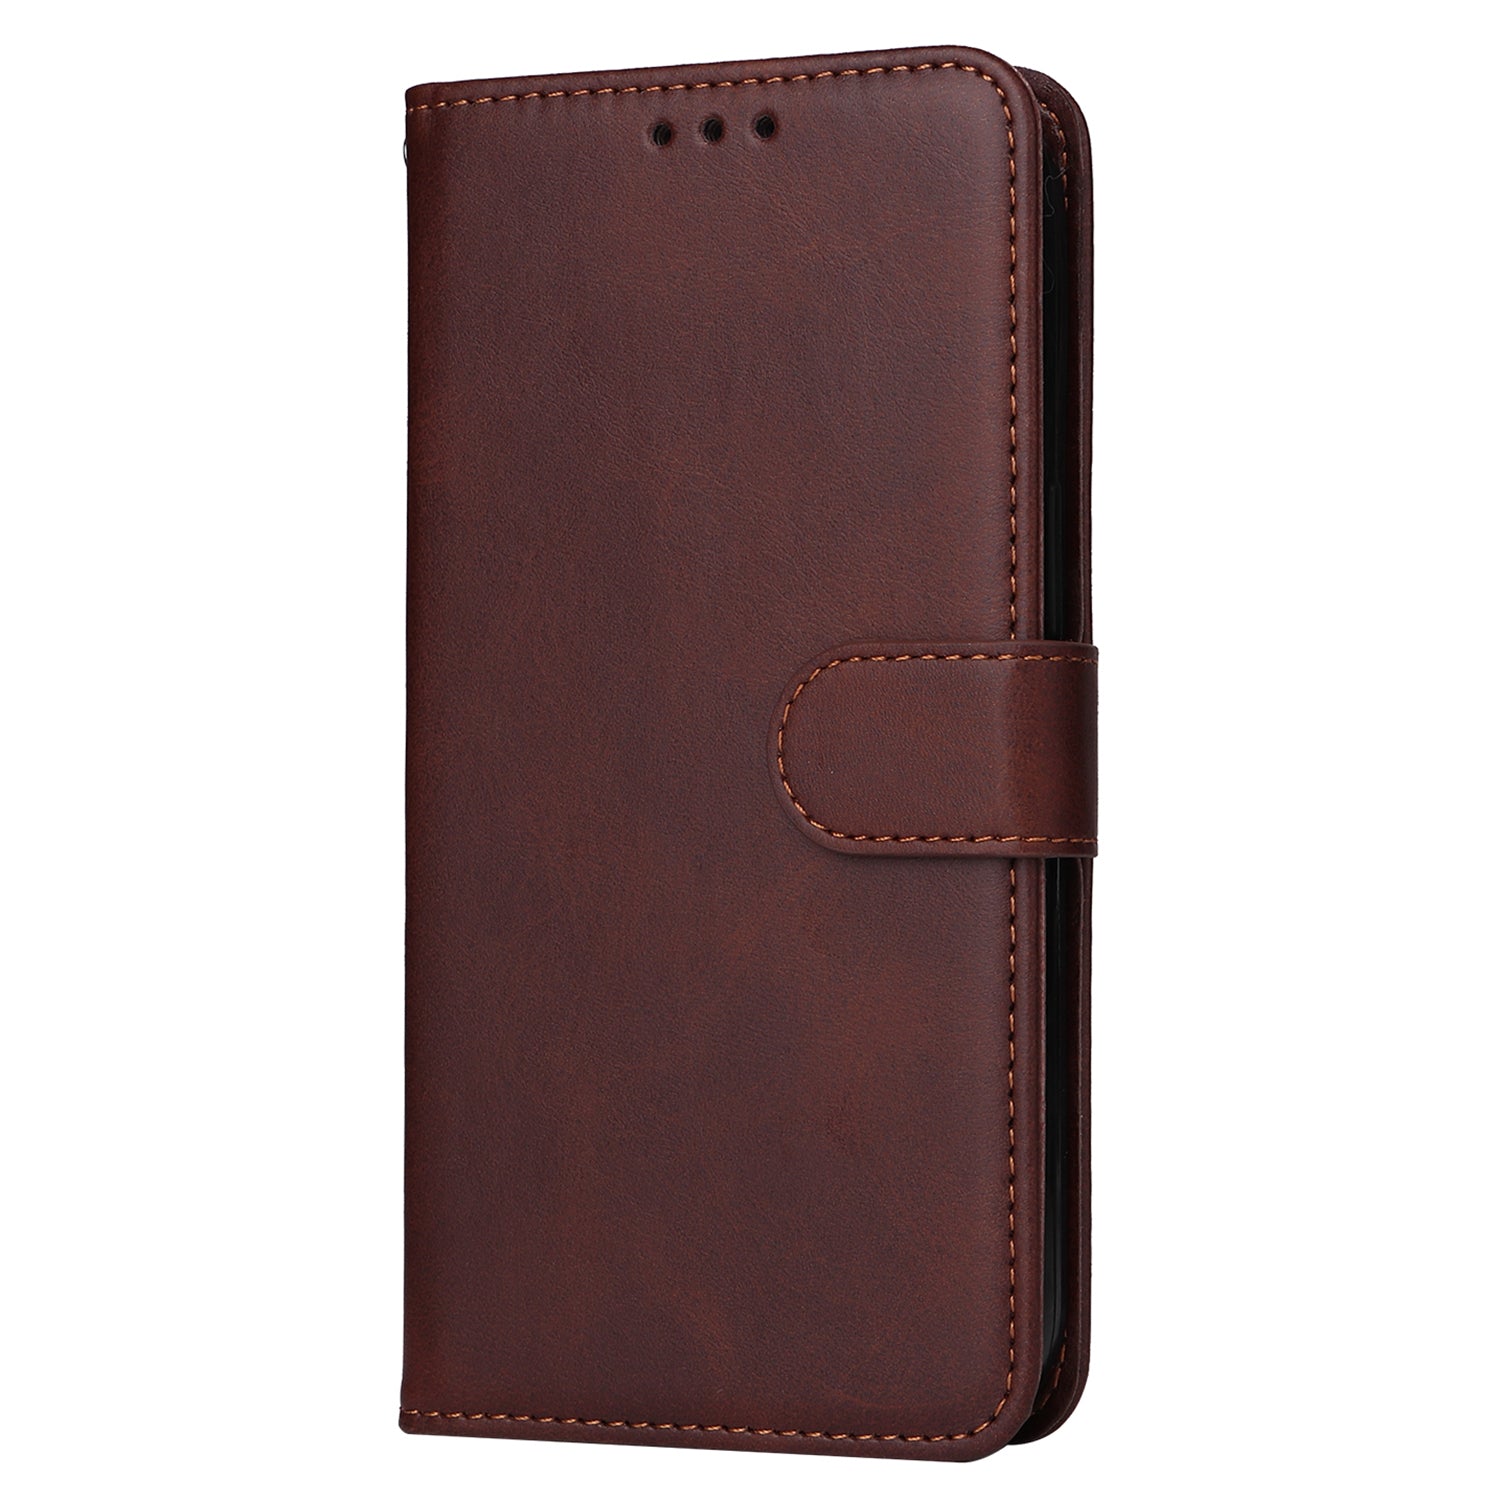 For vivo Y100 5G (Indonesia) / Y200e 5G / T3 5G (India) / V30 Lite 5G (India) Magnetic Case Leather Viewing Stand Phone Cover - Brown